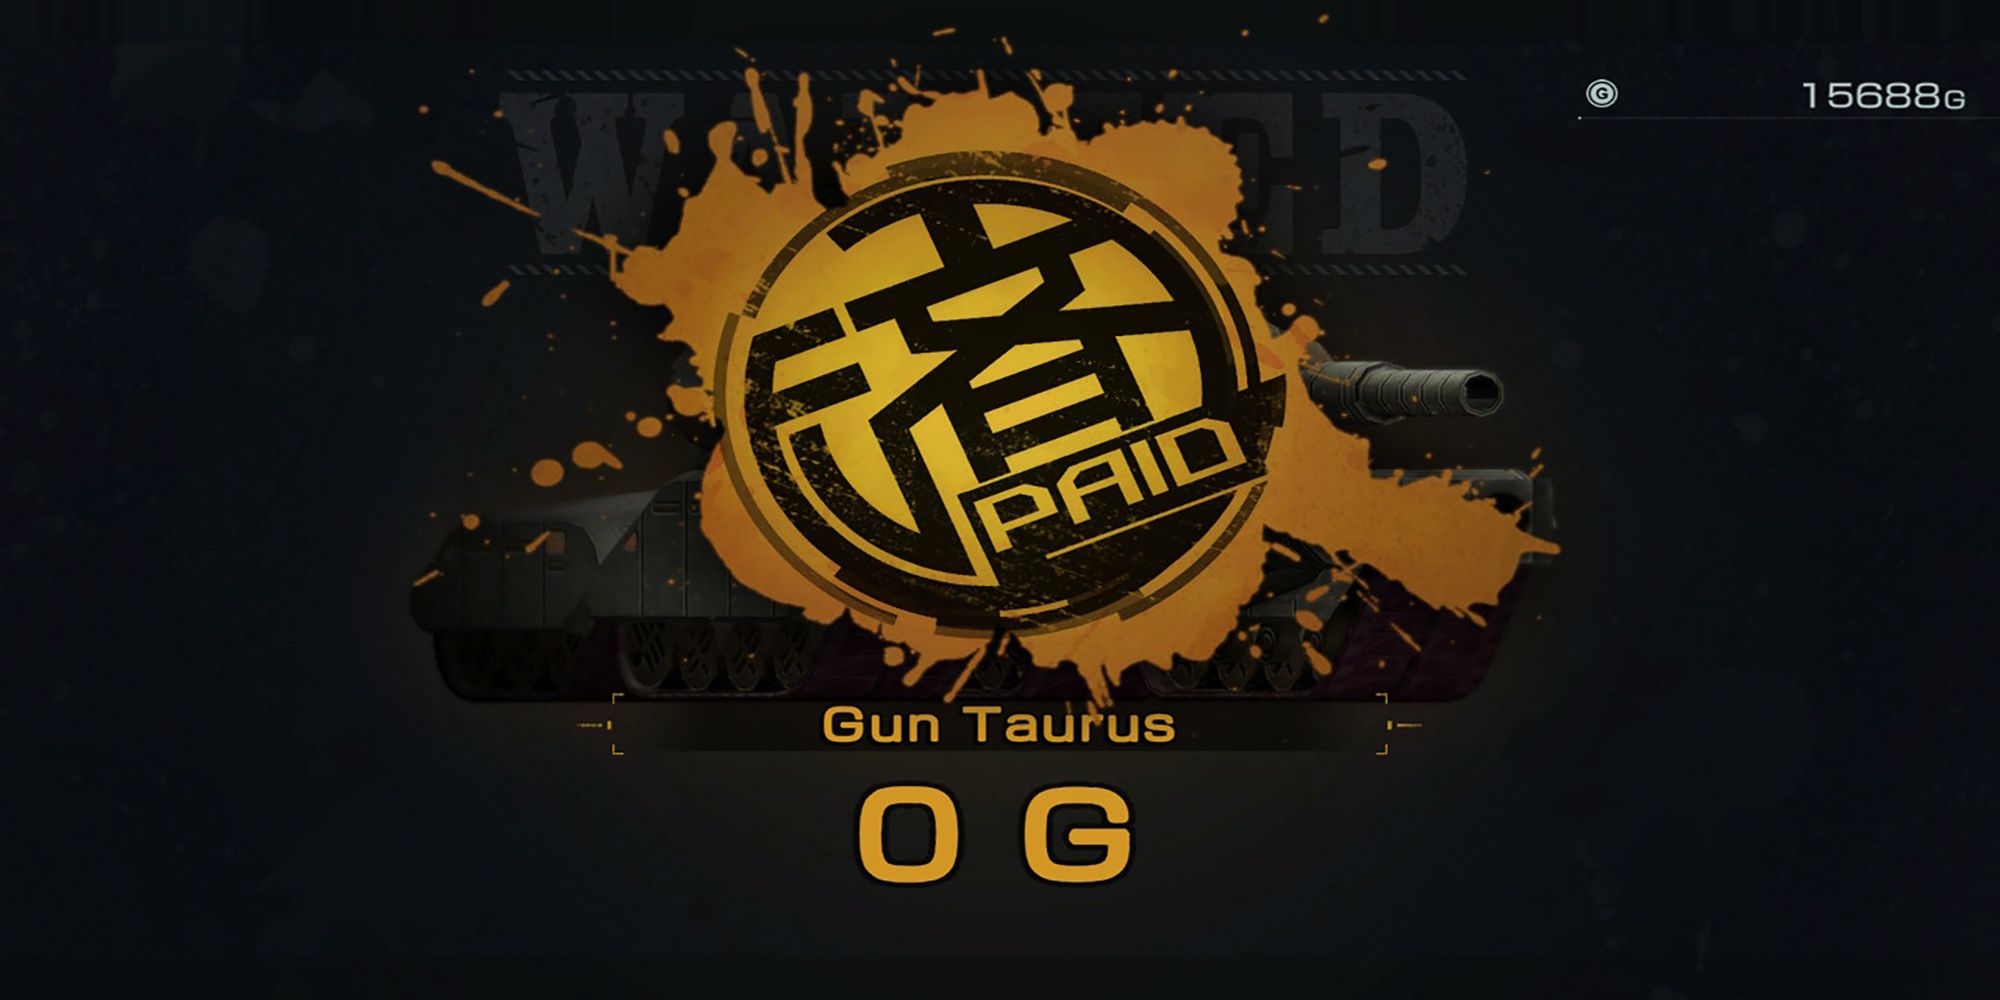 A "Paid" stamp is applied to Gun Taurus's Wanted poster in Metal Max Xeno Reborn.